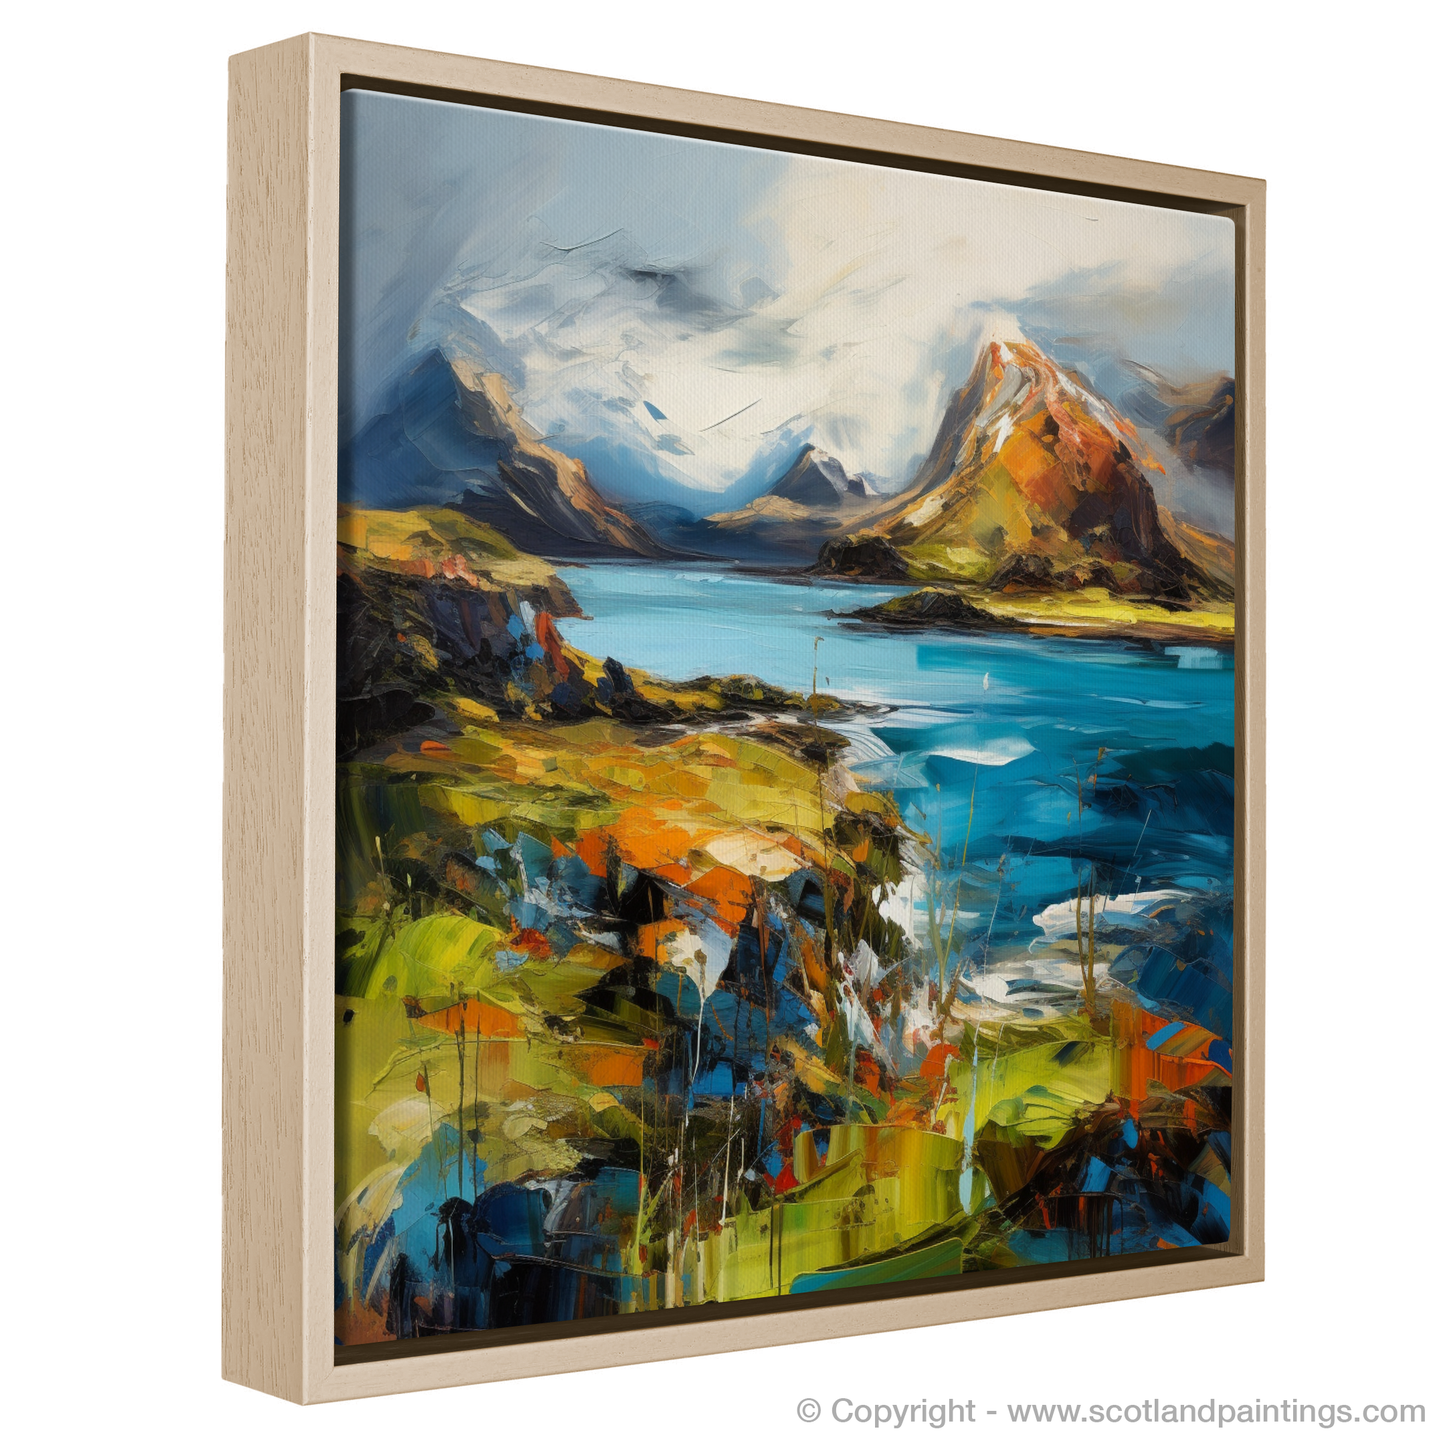 Painting and Art Print of Isle of Skye's smaller isles, Inner Hebrides entitled "Majestic Isles: An Expressionist Ode to Skye's Wild Beauty".